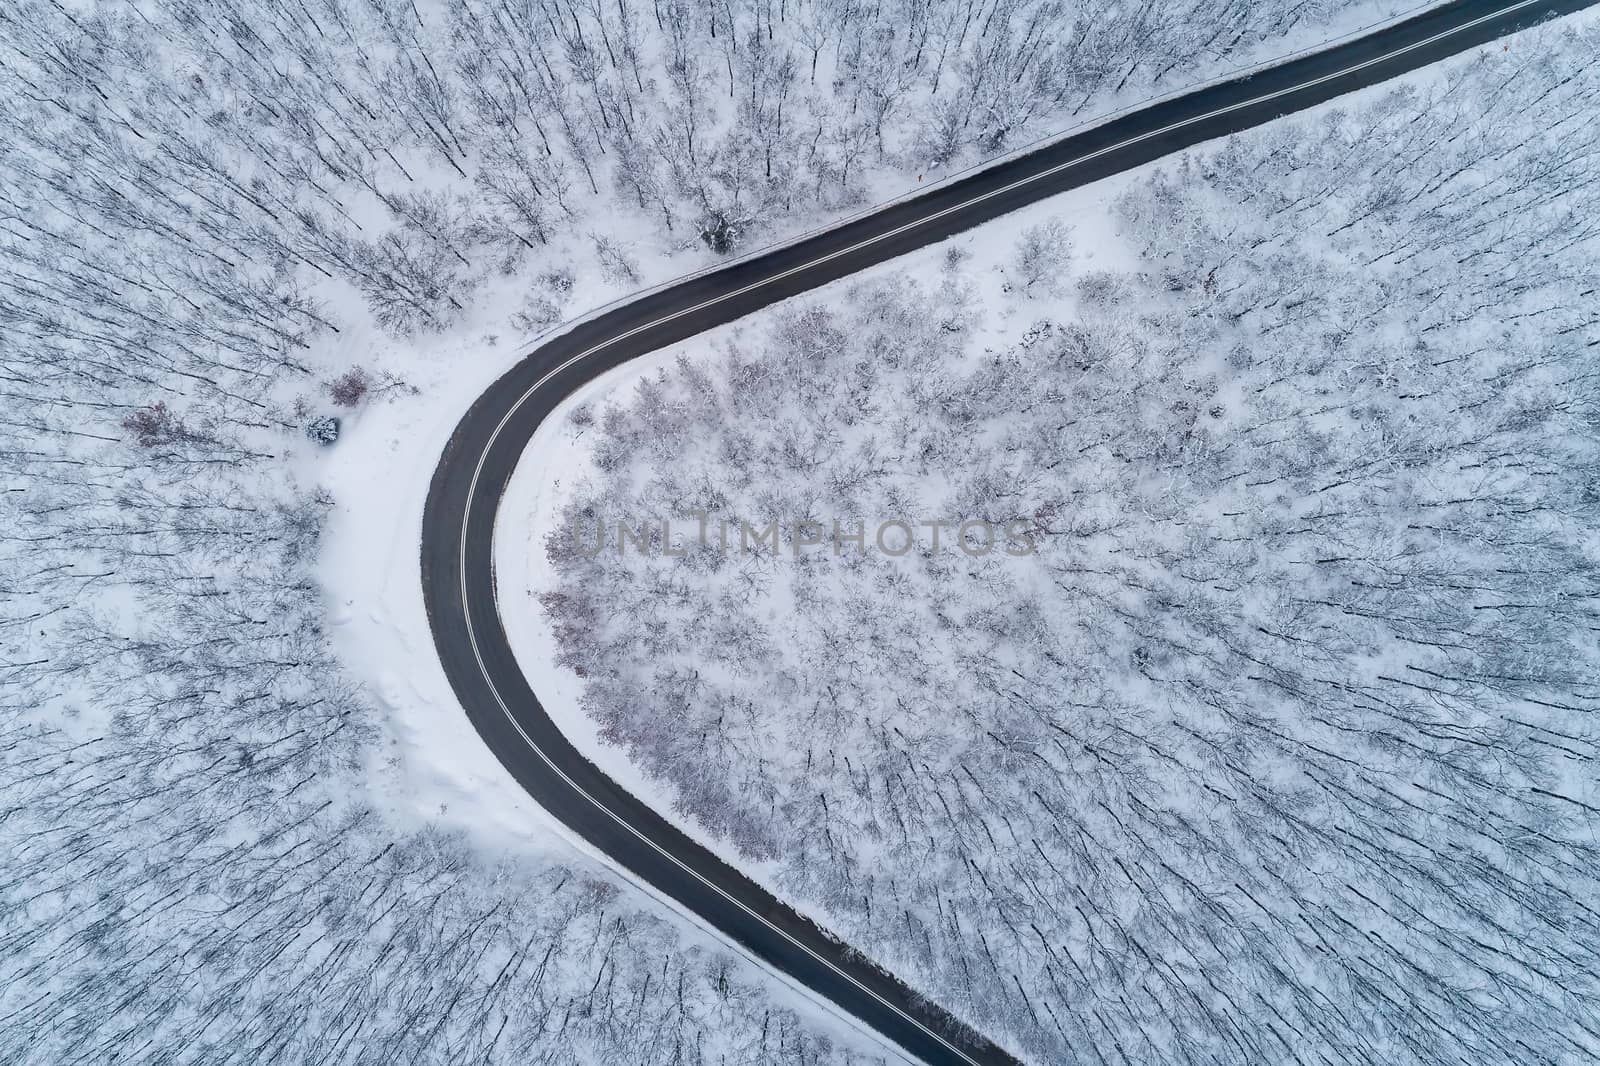 Aerial view of a provincial road passing through a snowy forest ιn Chalkidiki, northern Greece